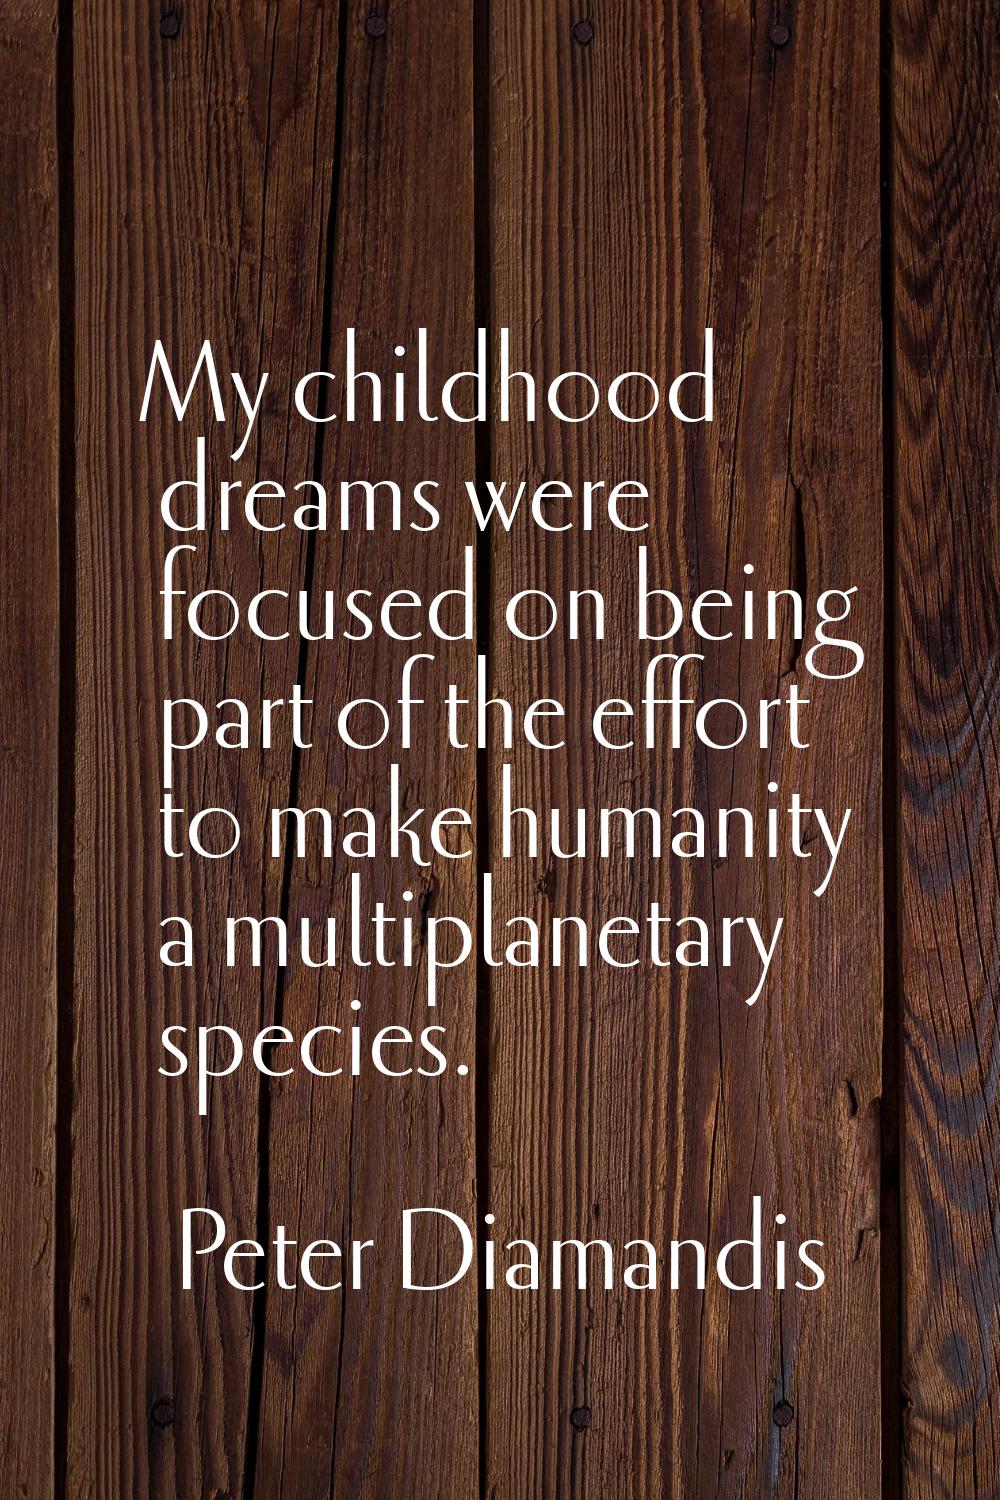 My childhood dreams were focused on being part of the effort to make humanity a multiplanetary spec